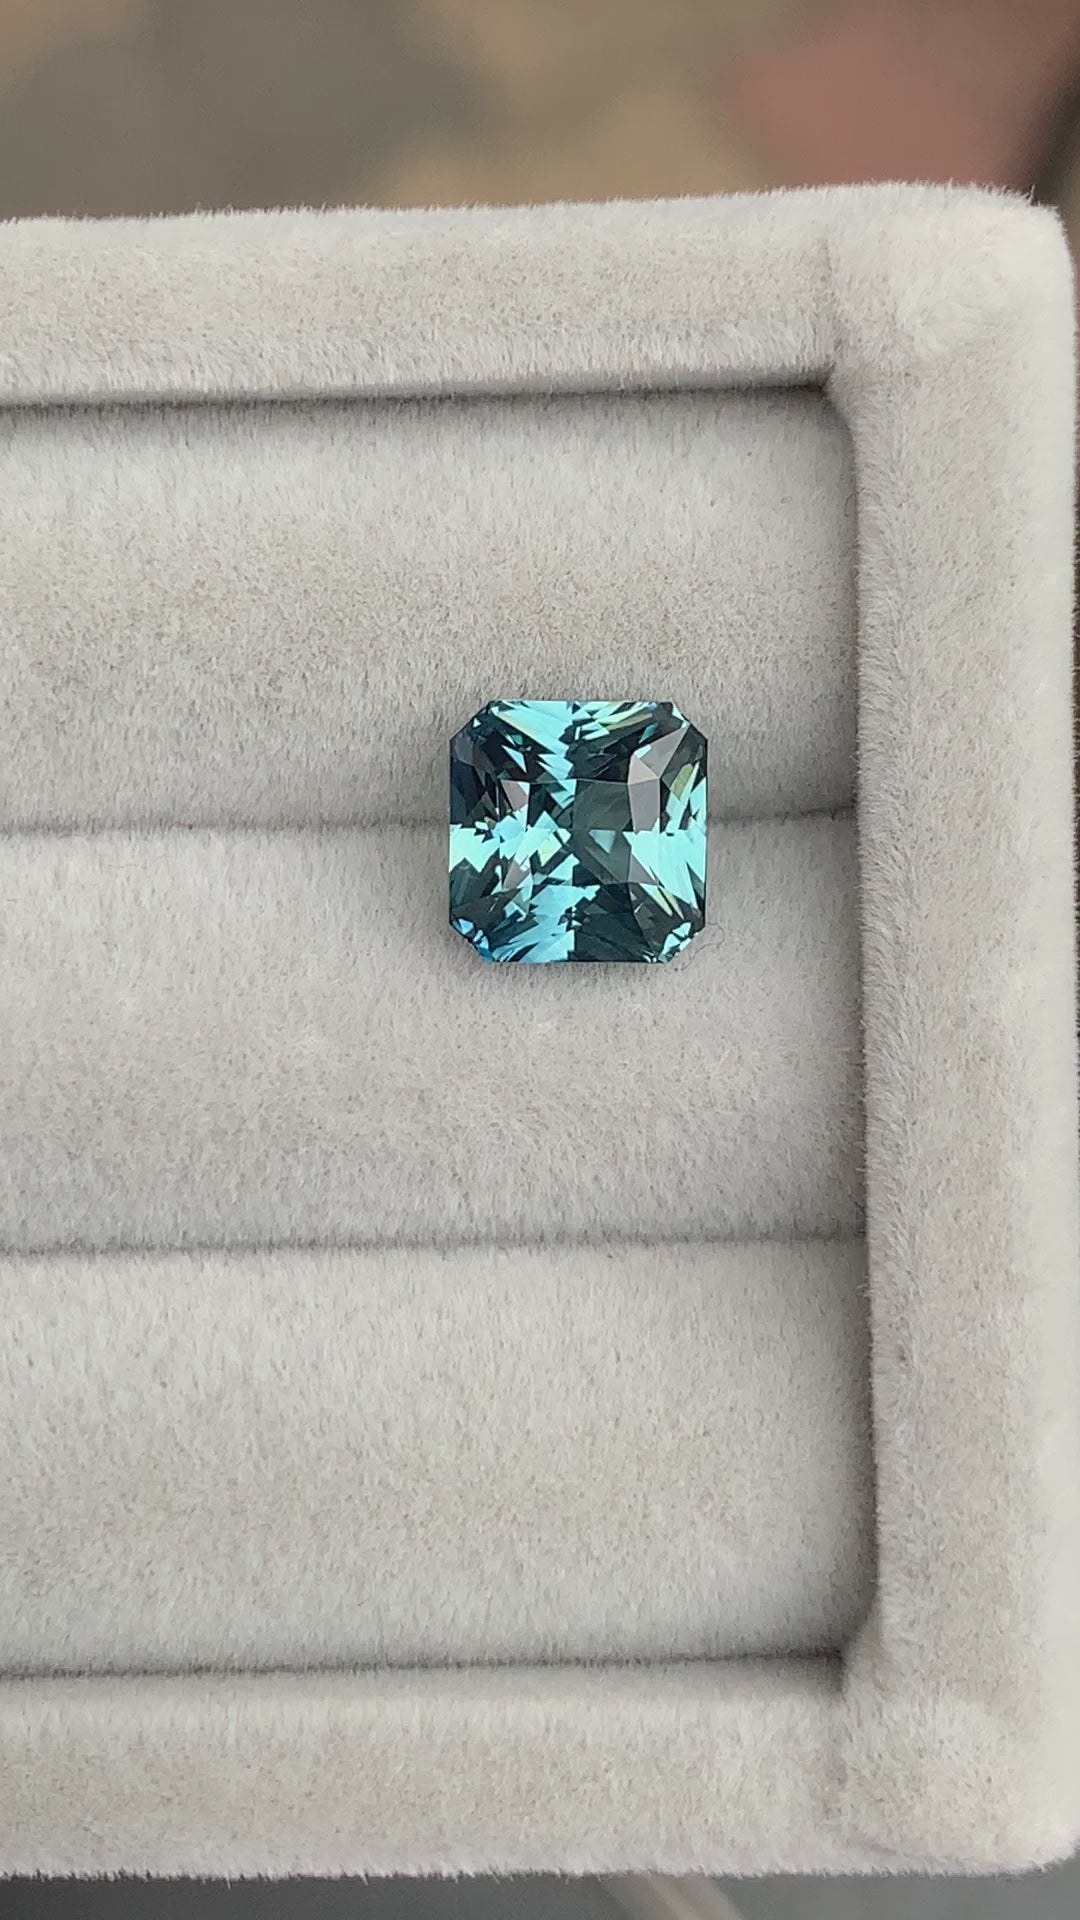 seconde video Saphir Teal taille carré · 3,9ct